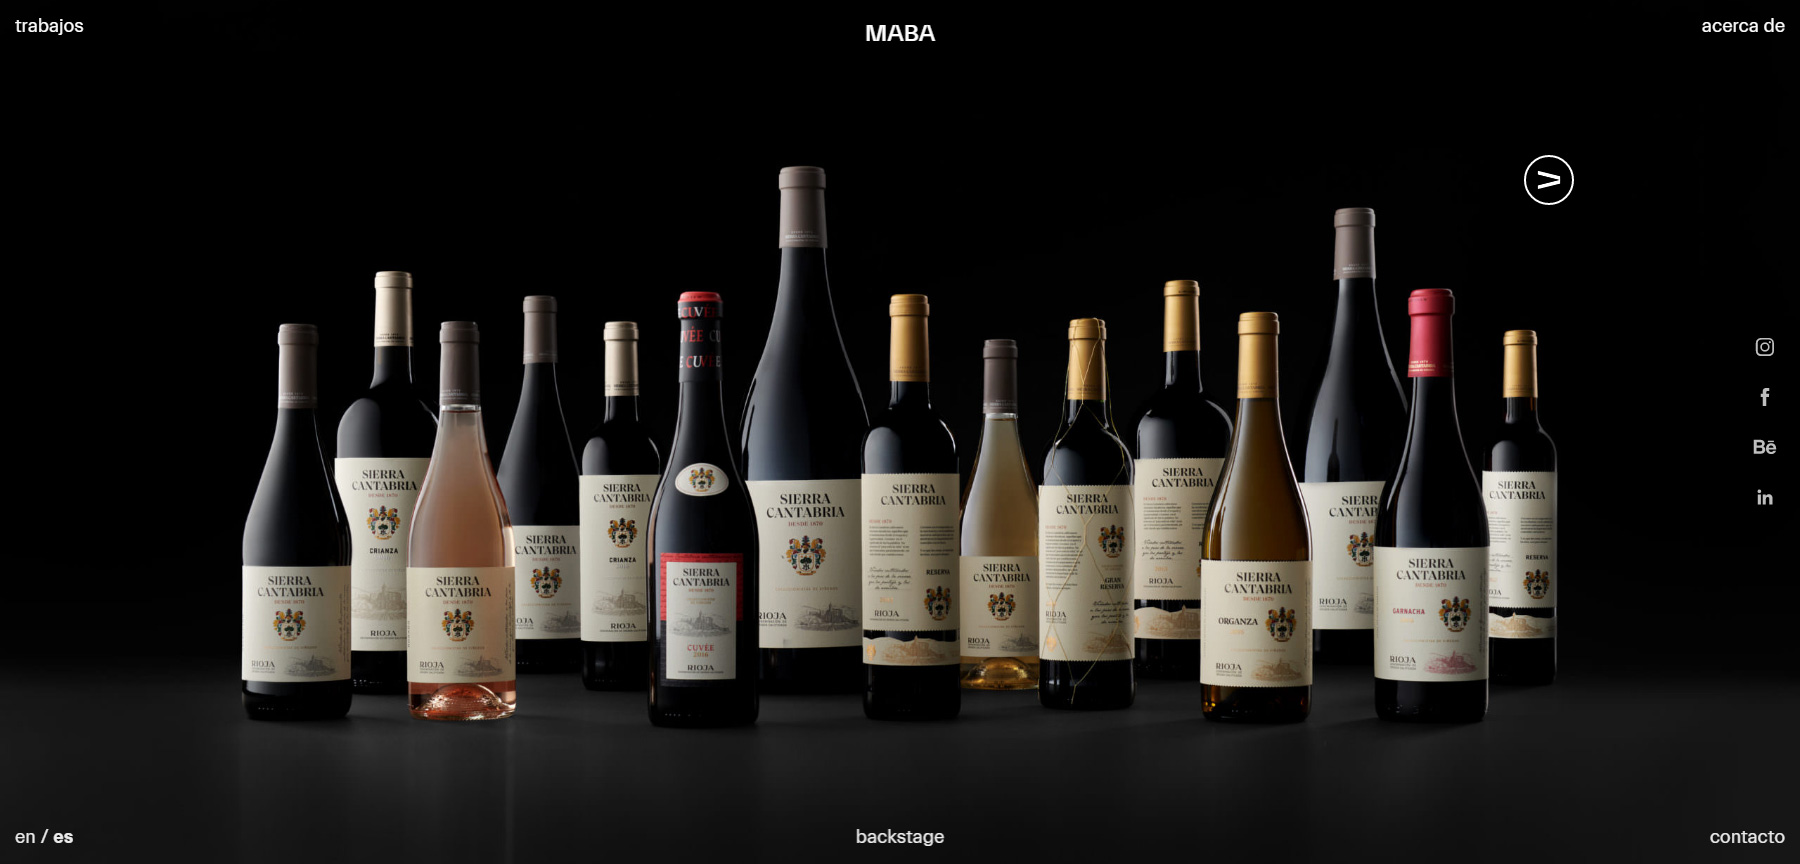 MABA - Website of the Day